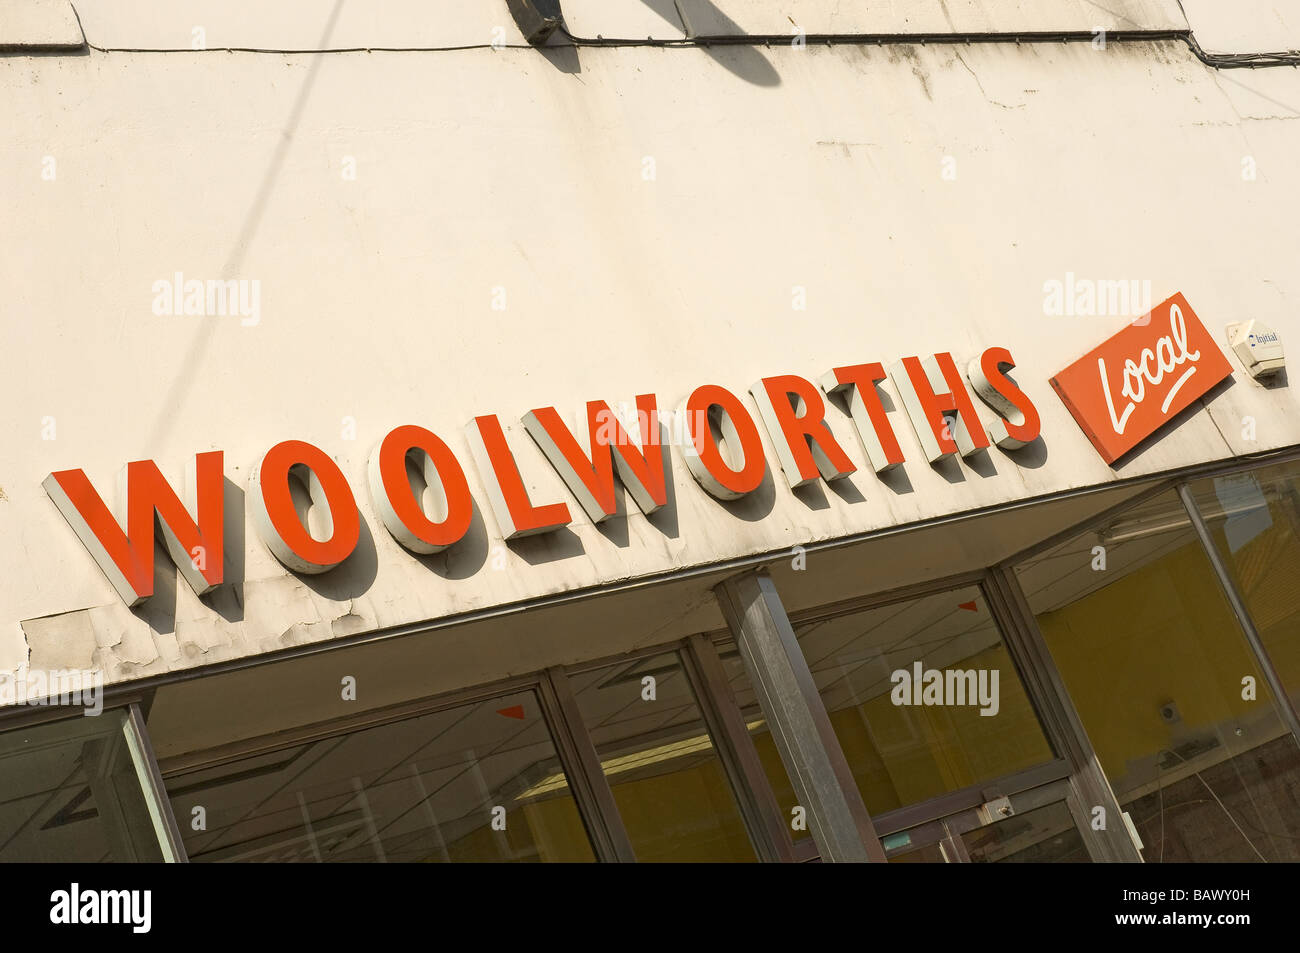 Woolworth Store Stock Photos & Woolworth Store Stock Images - Alamy